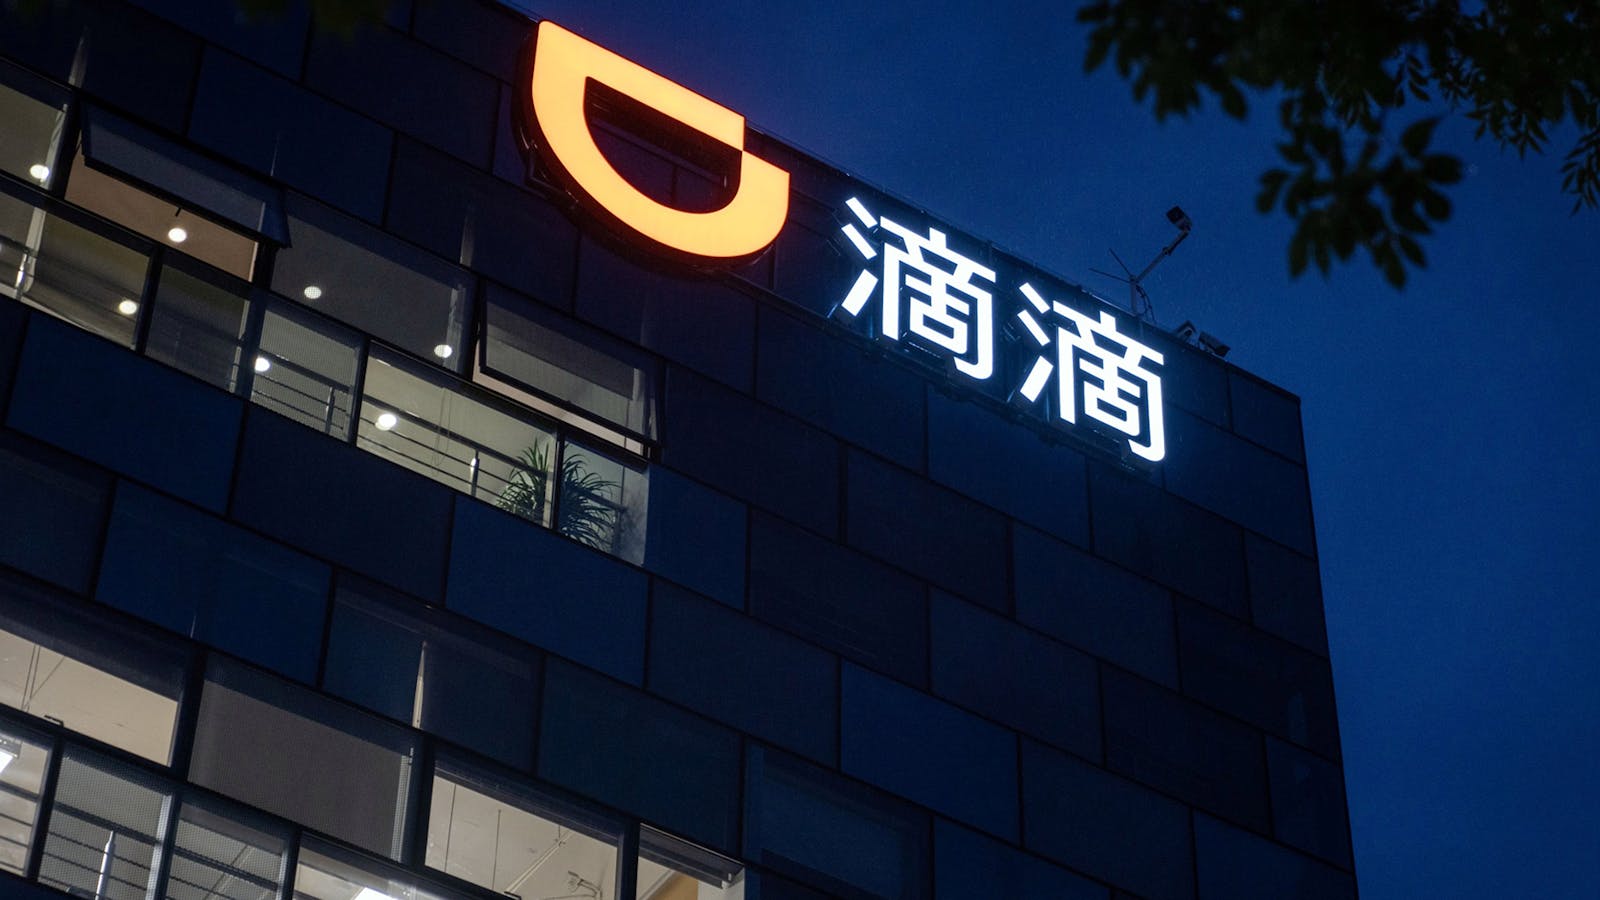 Didi Global awaits a shareholder vote on delisting from the New York Stock Exchange. Photo by Bloomberg.